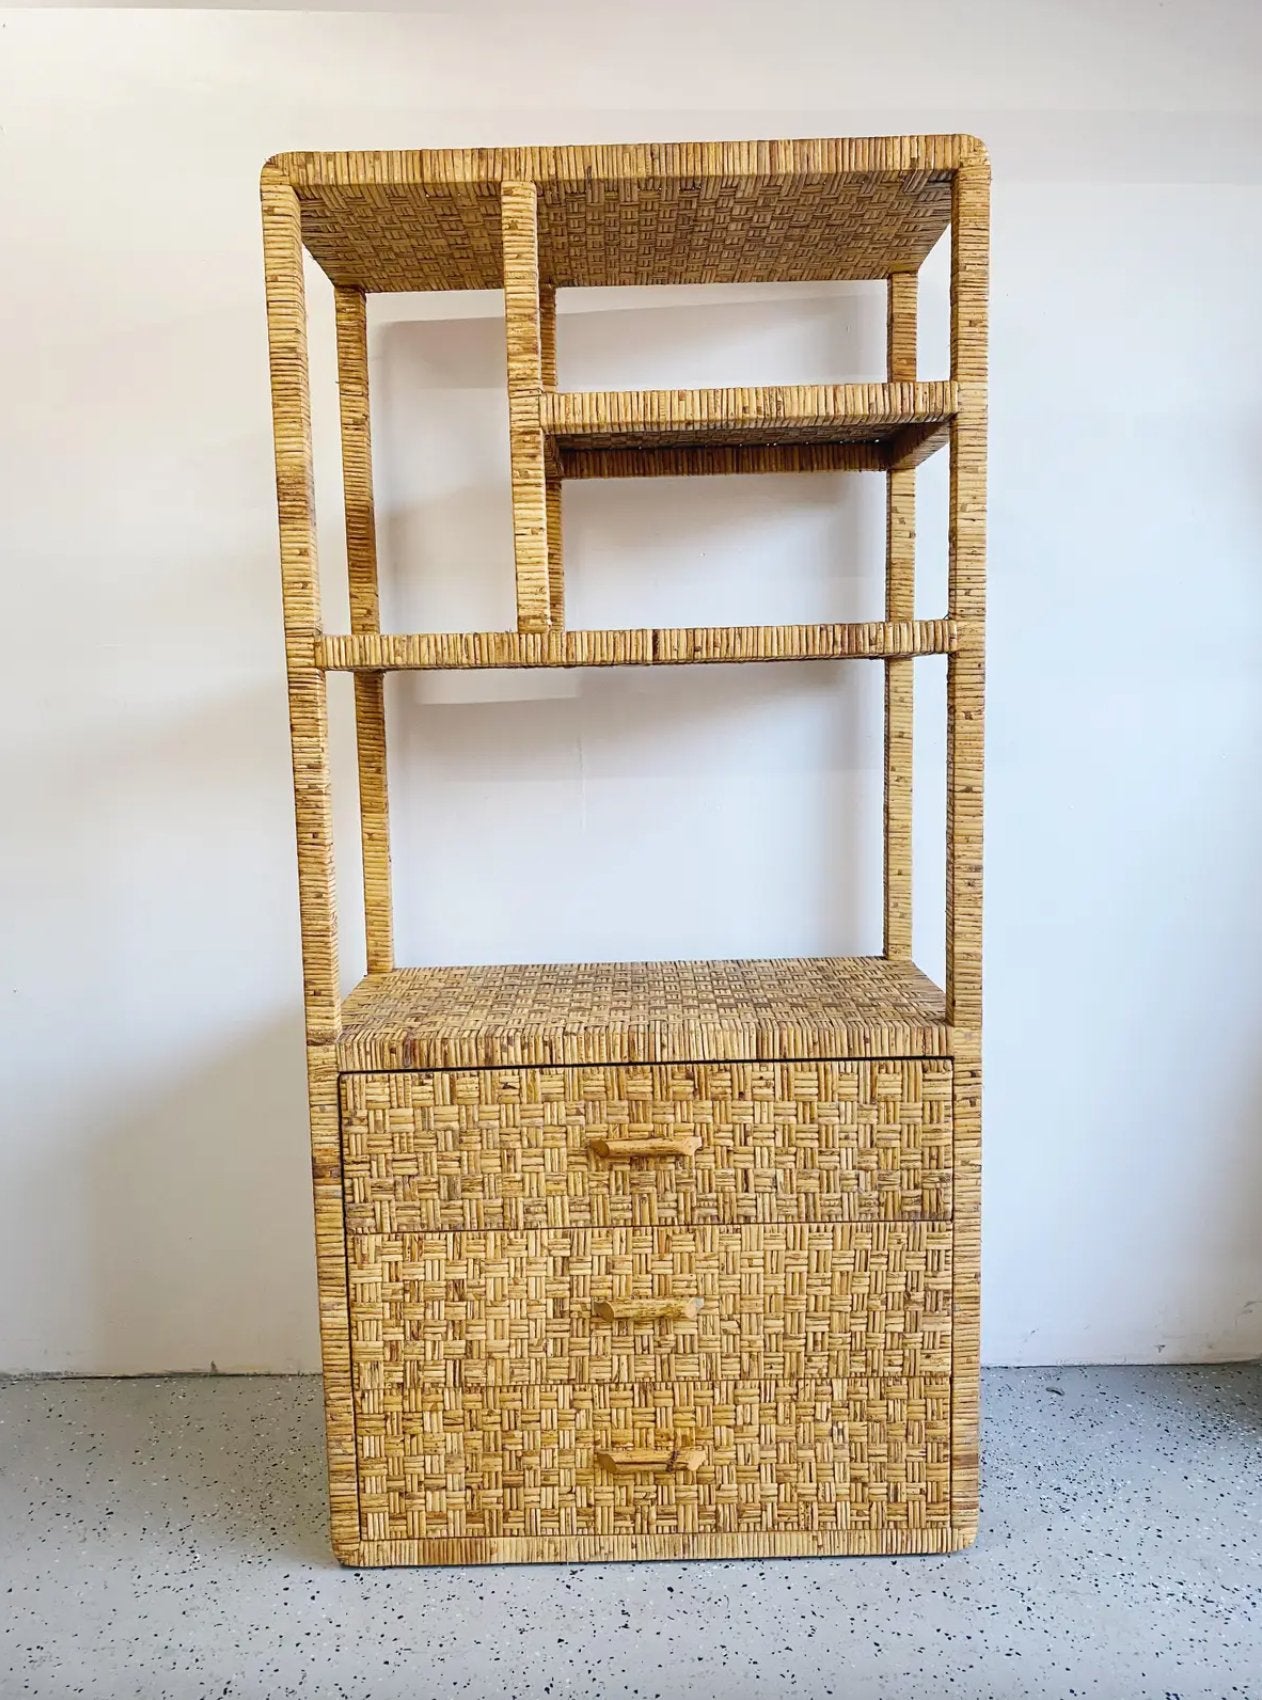 Coastal Wrapped Rattan Etagere With Drawers - Rehaus